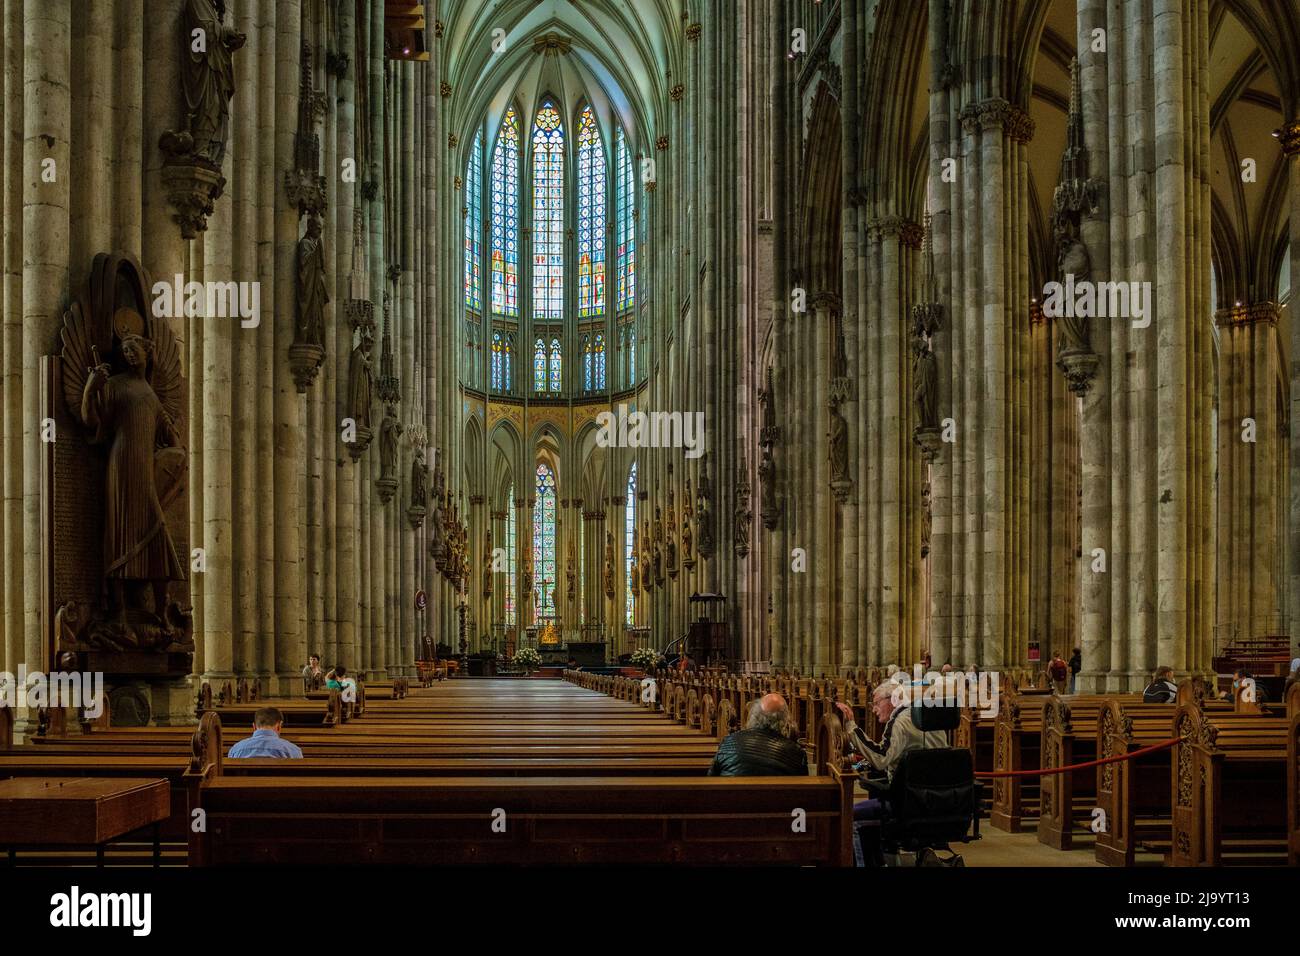 Cologne, Germany - May 17, 2022 : Beautiful architecture of the Cathedral Dom in Cologne Germany Stock Photo